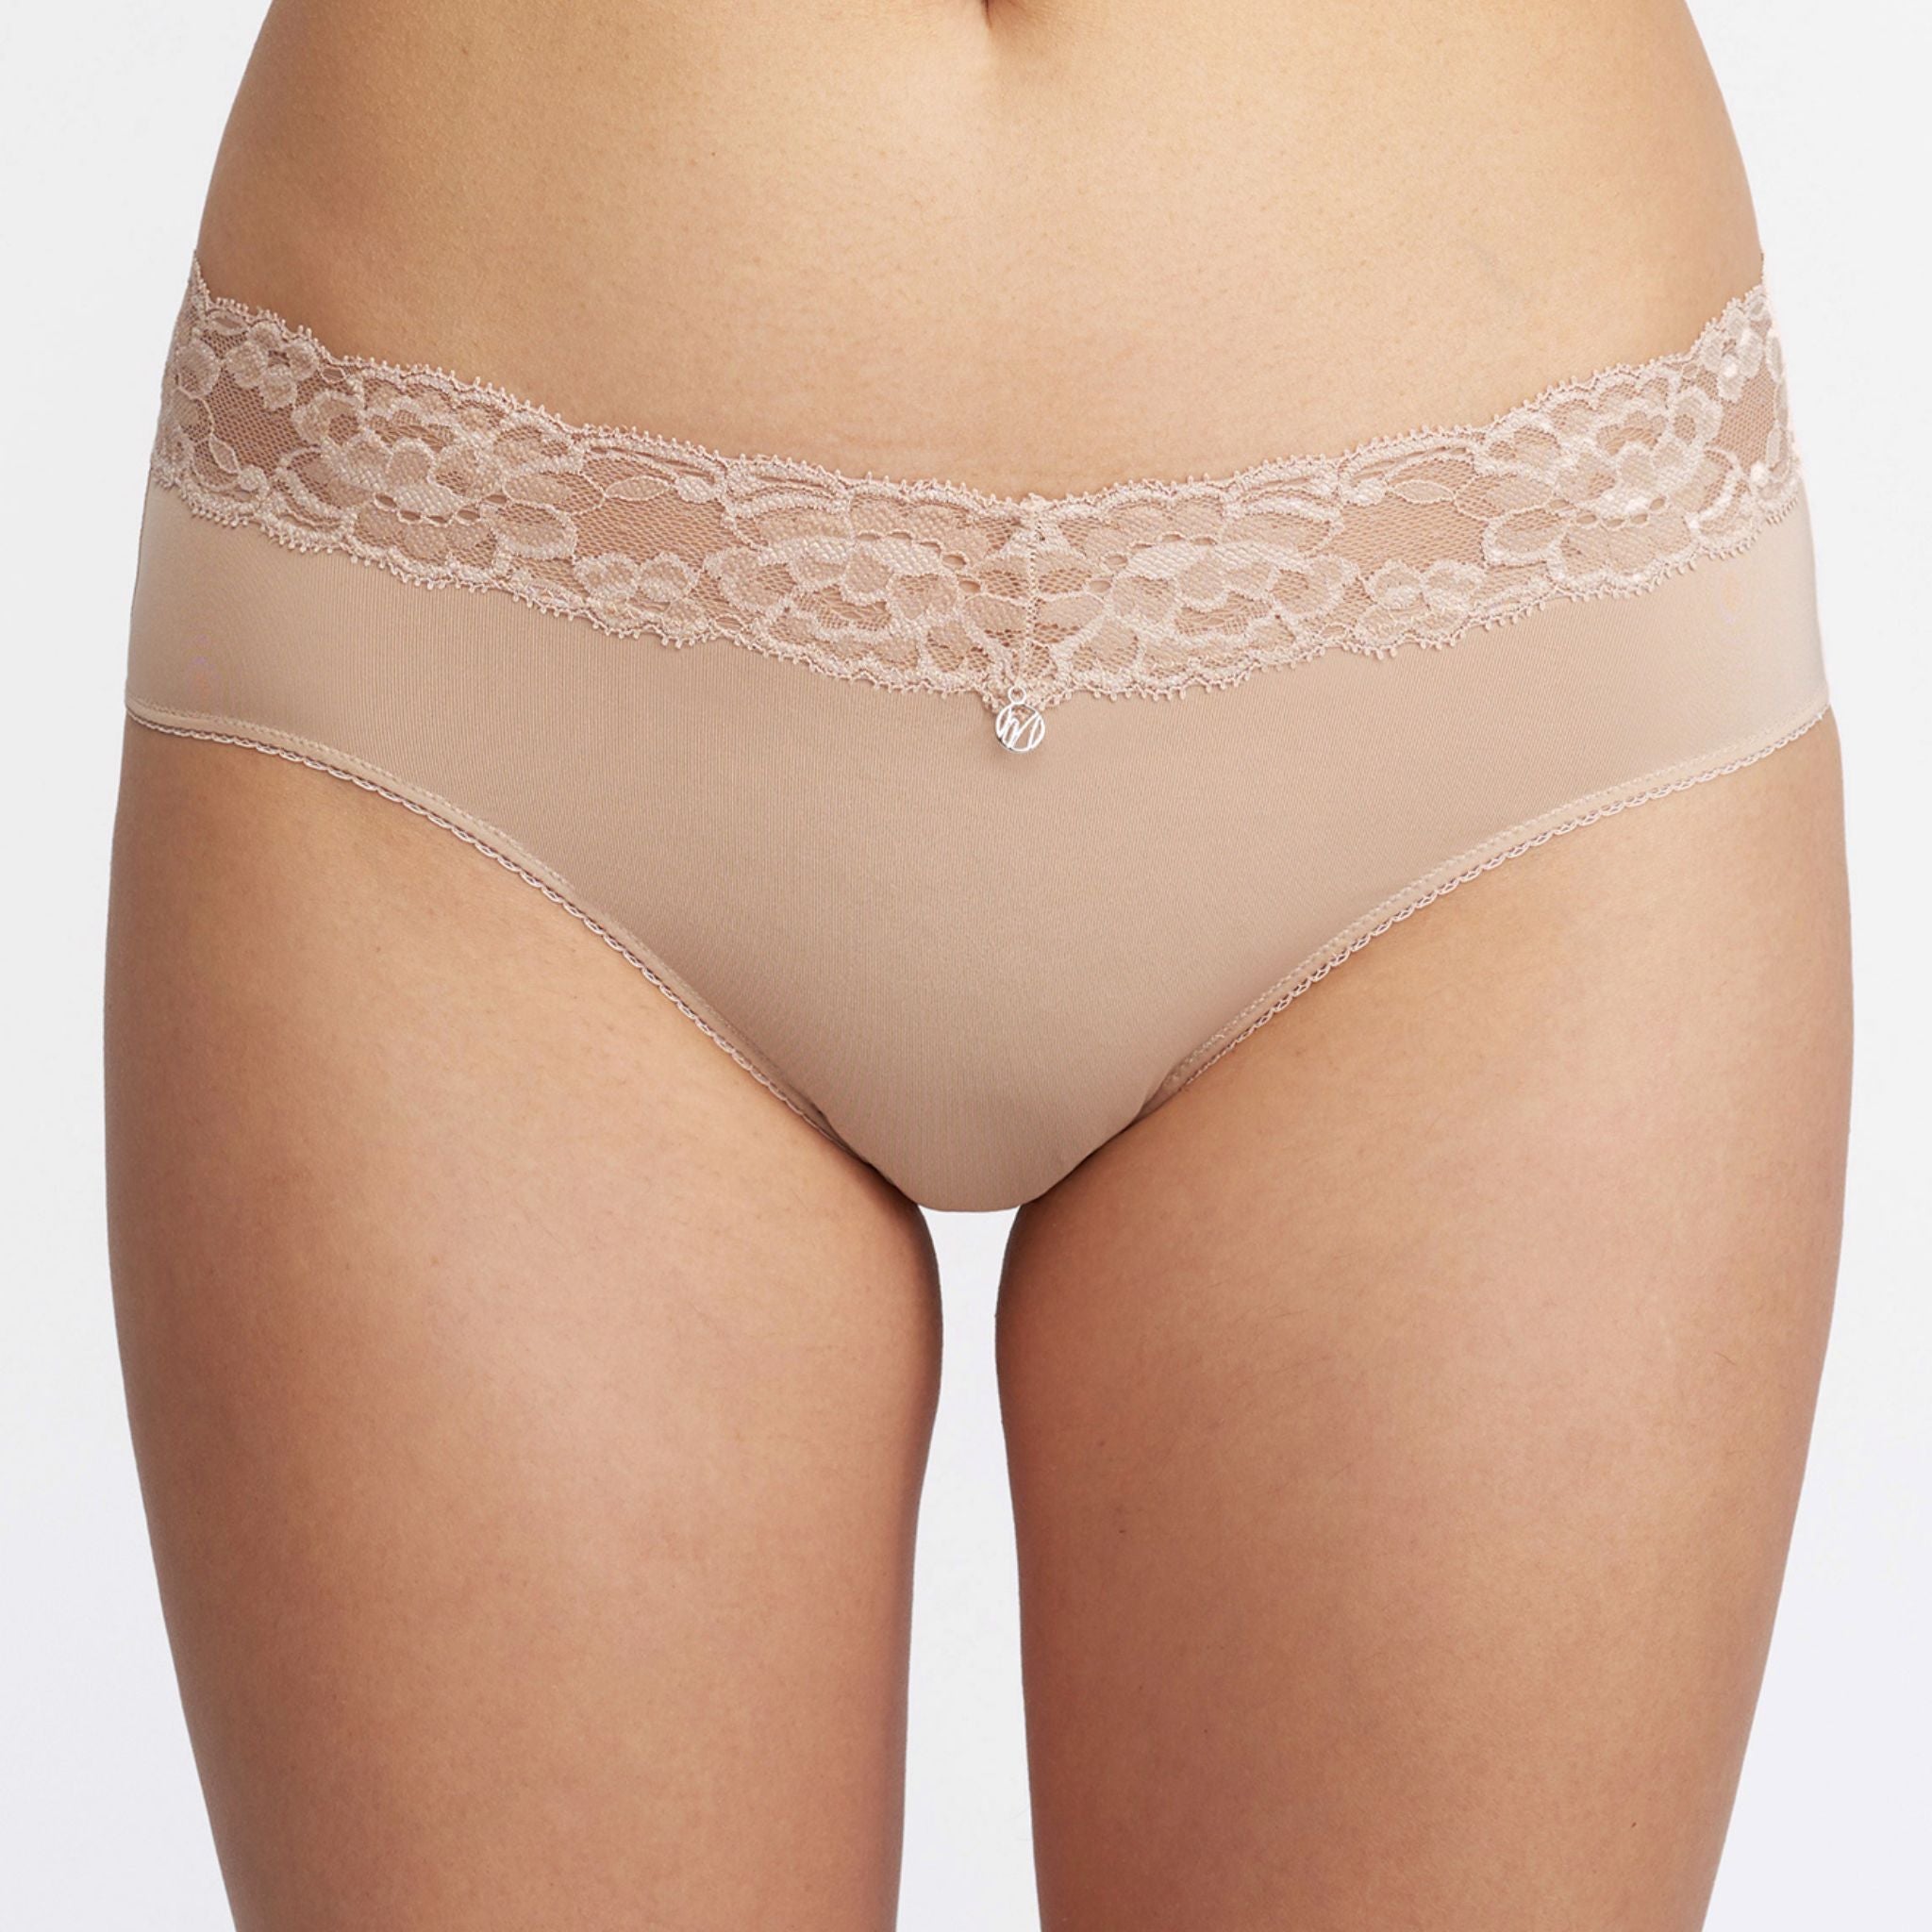 This panty has you covered! Made with ultra-soft, lightweight microfiber, the Brief has full coverage at the back and flat elastic around the legs and at the top for a line-free look.